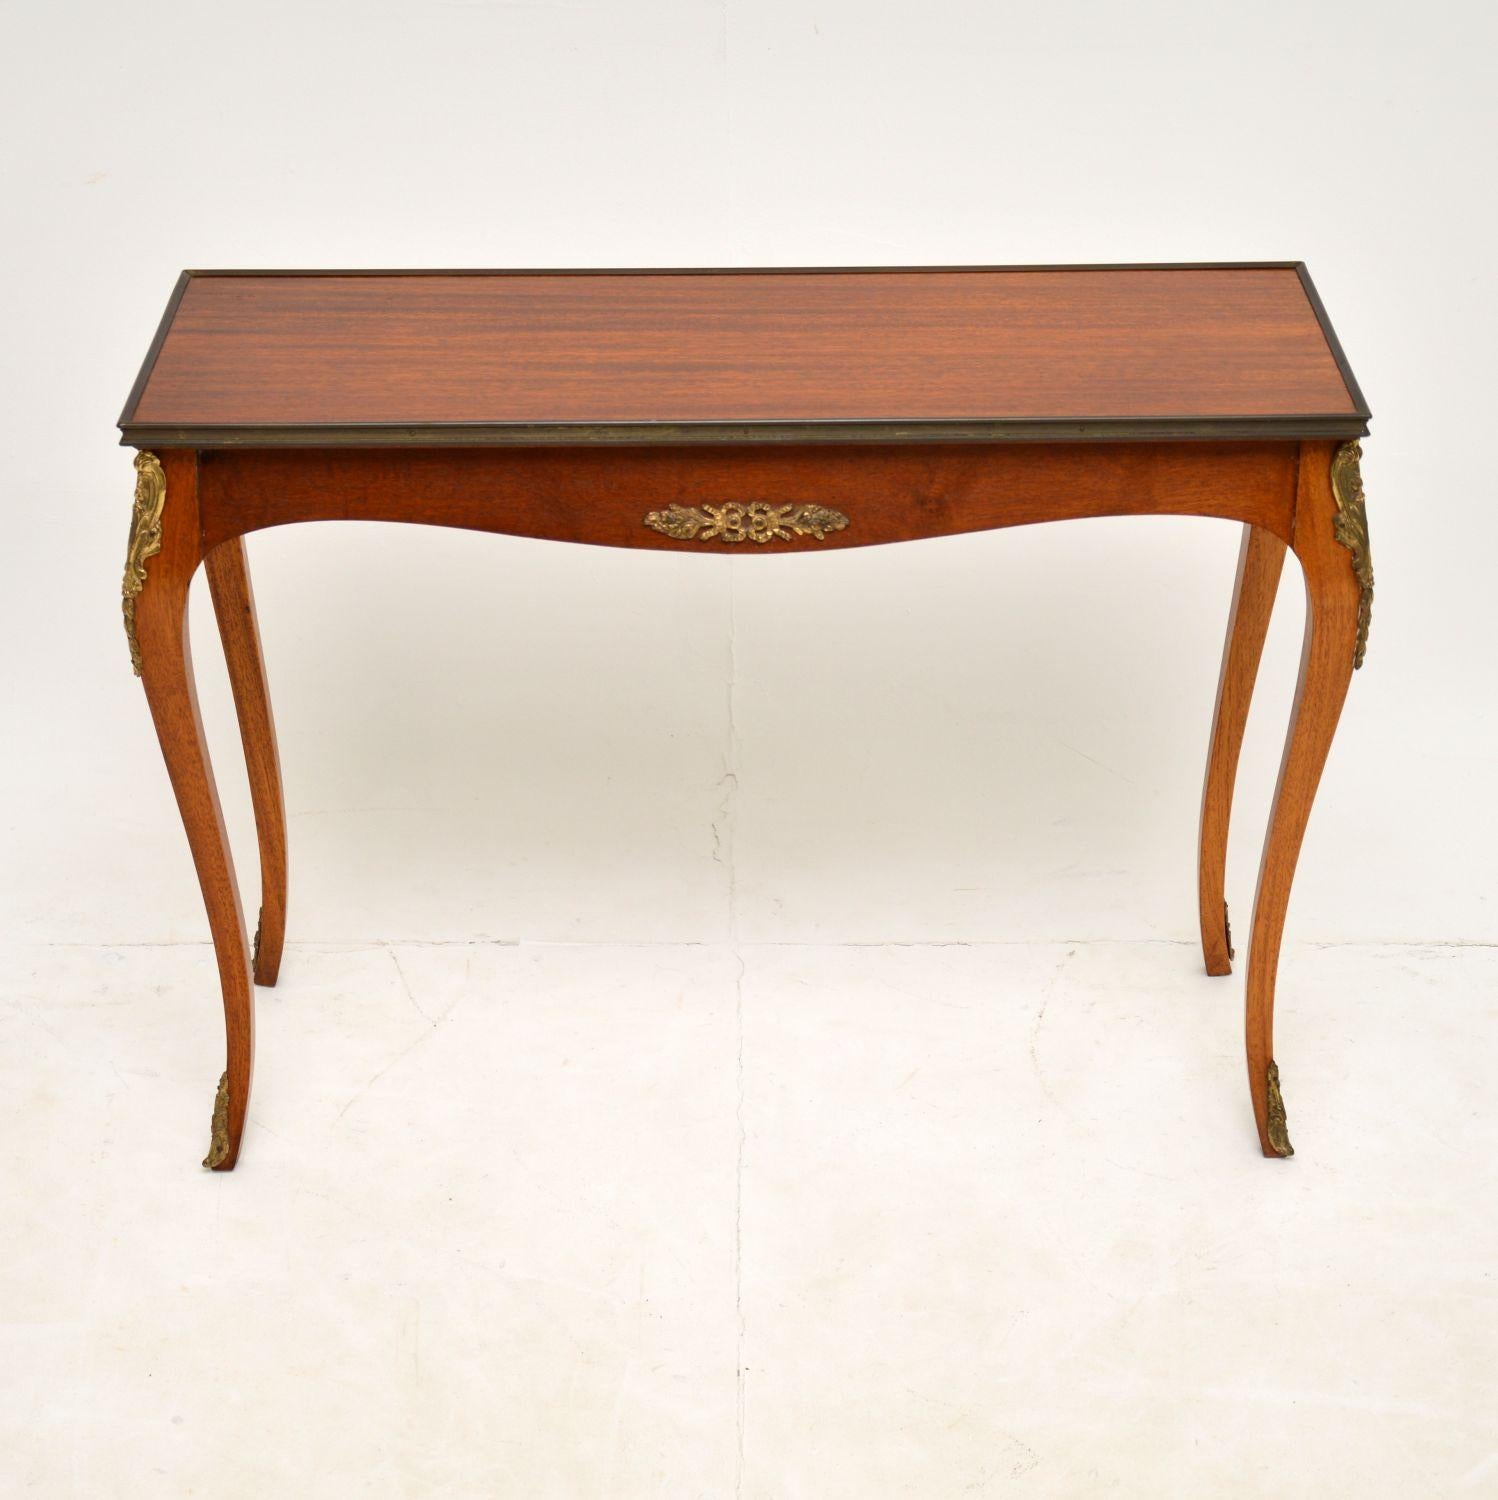 A lovely and unusually small proportioned wooden side table. This was made in France & dates from the 1920-30’s.

It is an unusual size, though it’s designed to look like a console table, it is actually only a little bigger than a coffee table. It